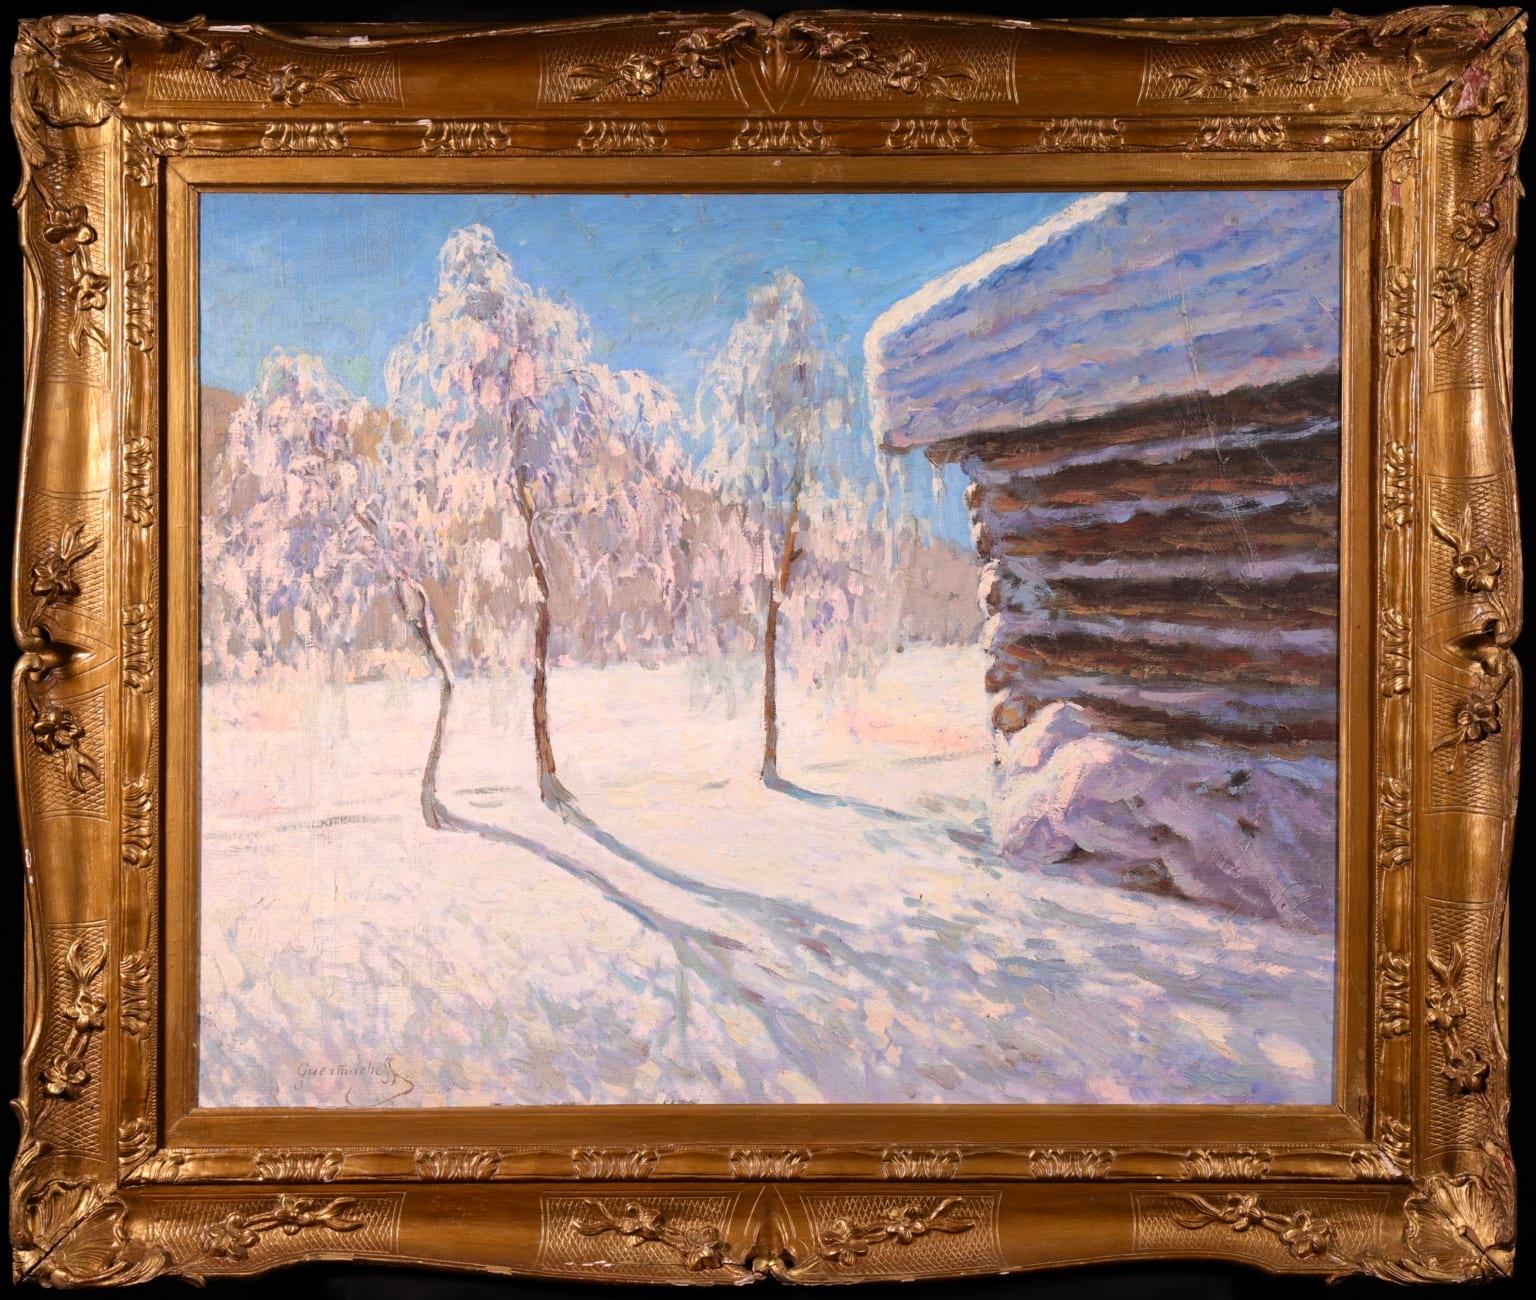 Stunning impressionist winter landscape oil on canvas circa 1920 by Russian painter Mikhail Guermacheff (Mikhail Markanovic Germasev). The work depicts a landscape blanketed in powdery white snow. The trees stand beside a wooden hut, the sun